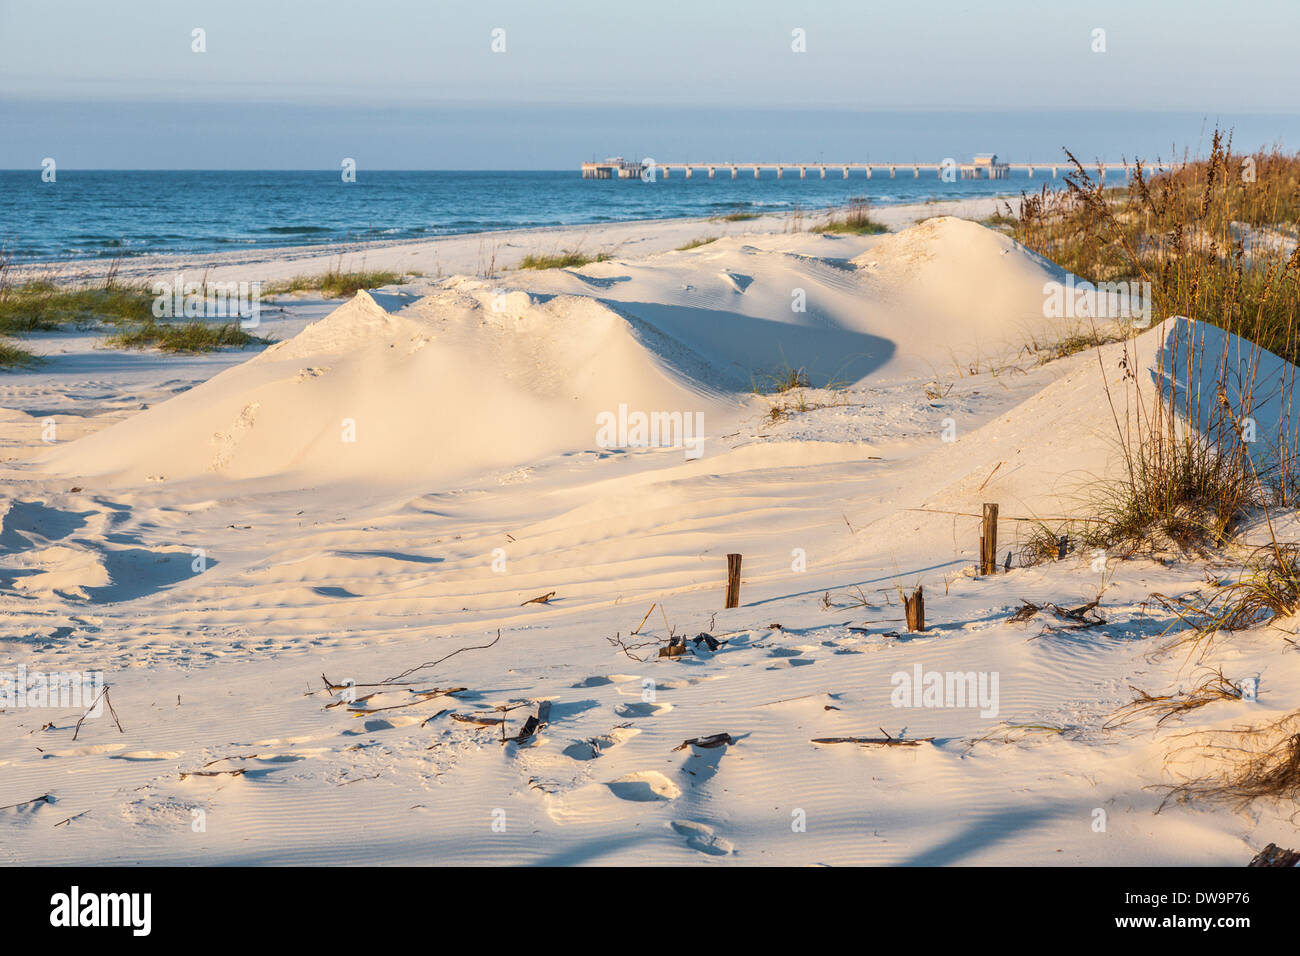 Sand dunes and sea oats help to protect the beaches from erosion at Gulf Shores, Alabama Stock Photo